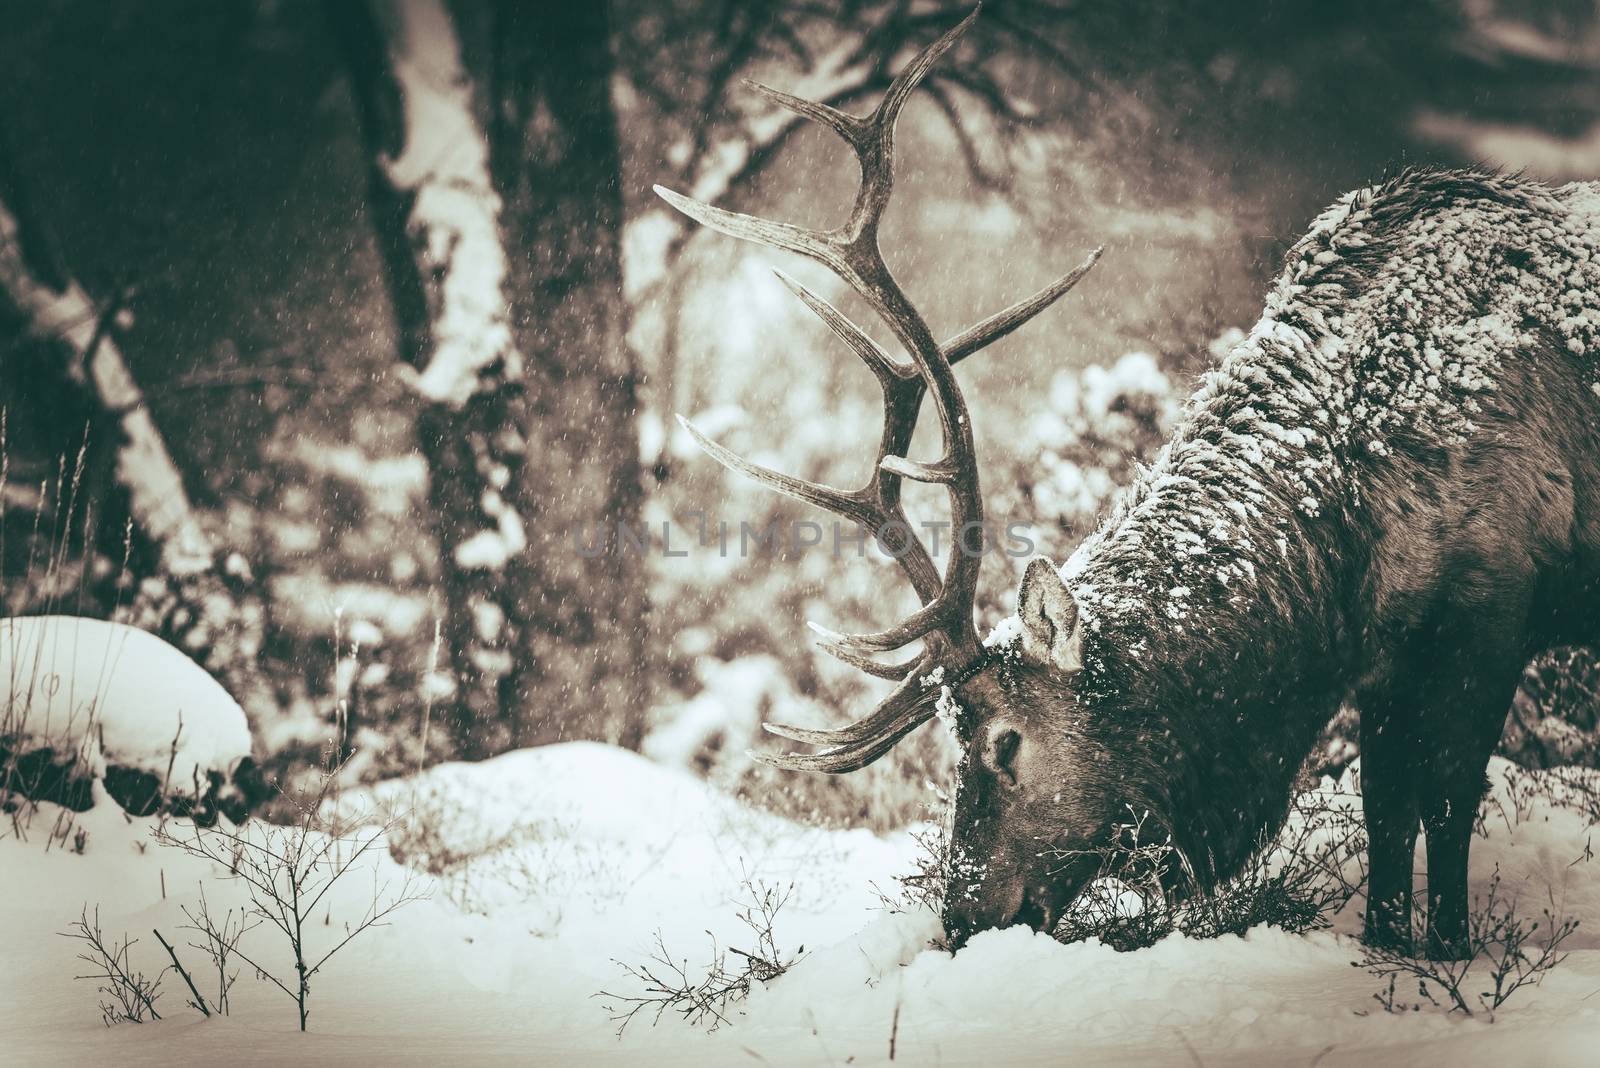 Lonely Elk in Winter by welcomia